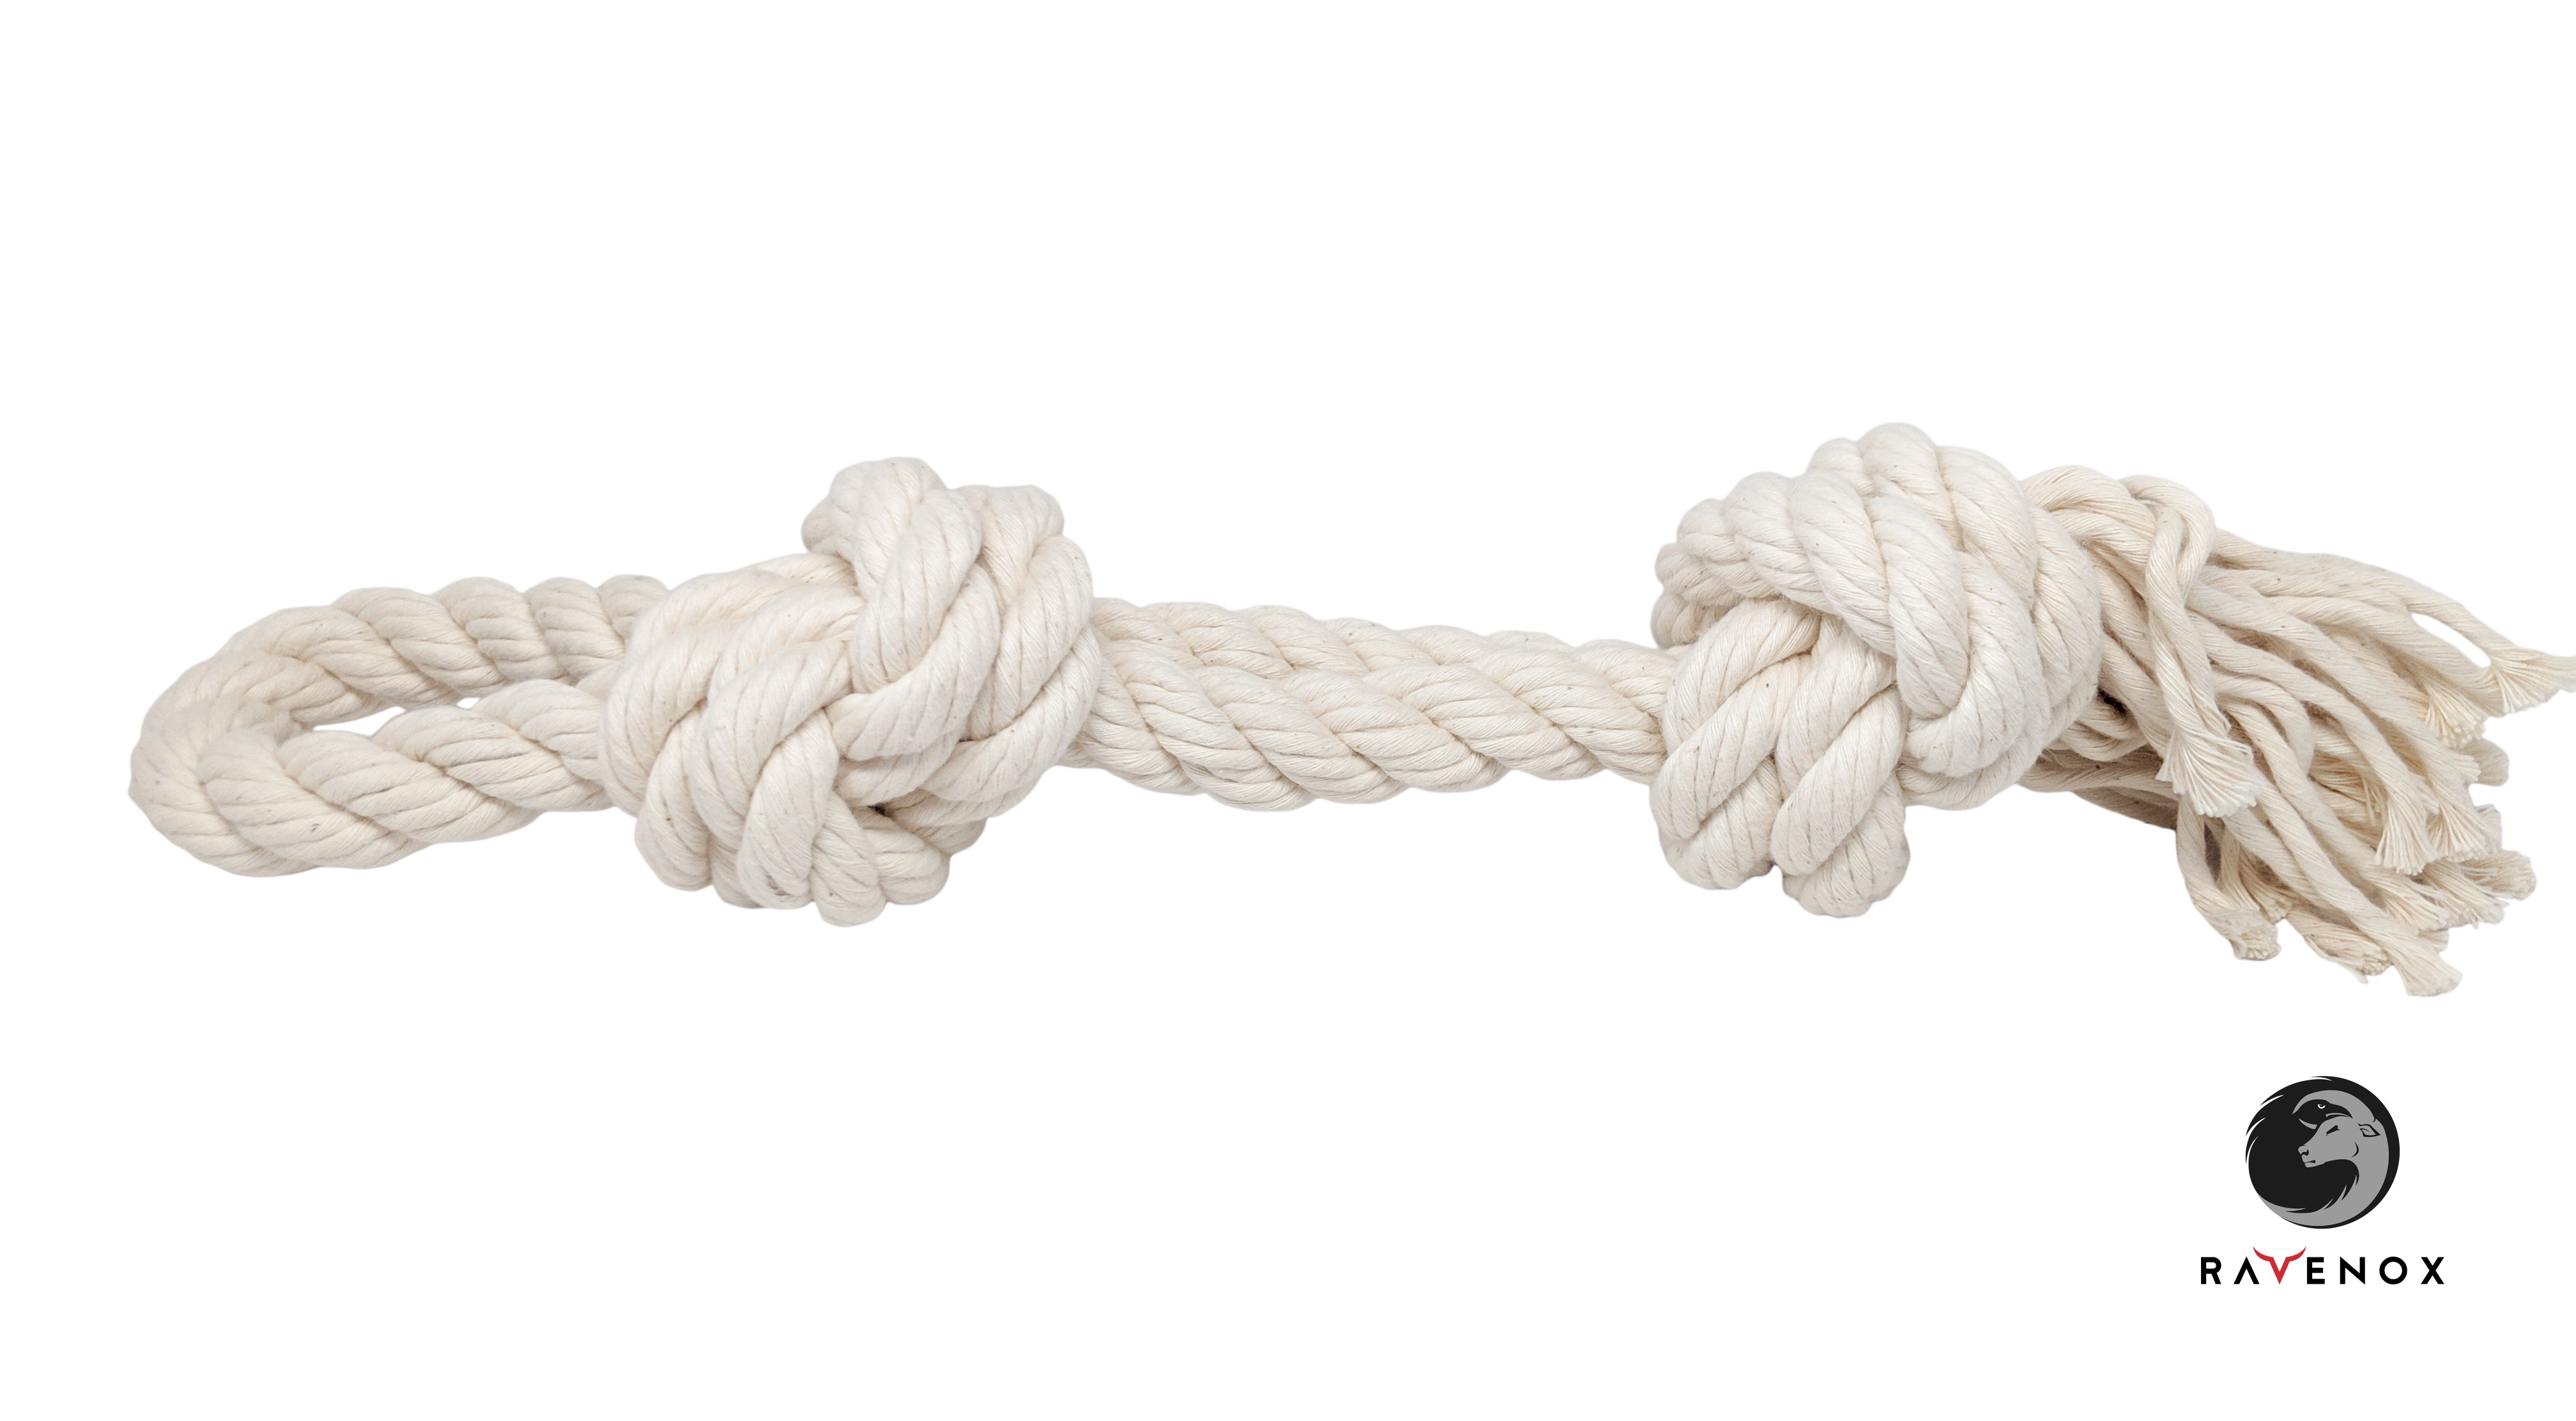 Ravenox 100% Cotton Twisted Rope | (White)(1/4 in x 10 ft) |USA Made  Natural Cord | Baker & Butchers Twine, Macramé, Knotting, Crafts, Pet Toys